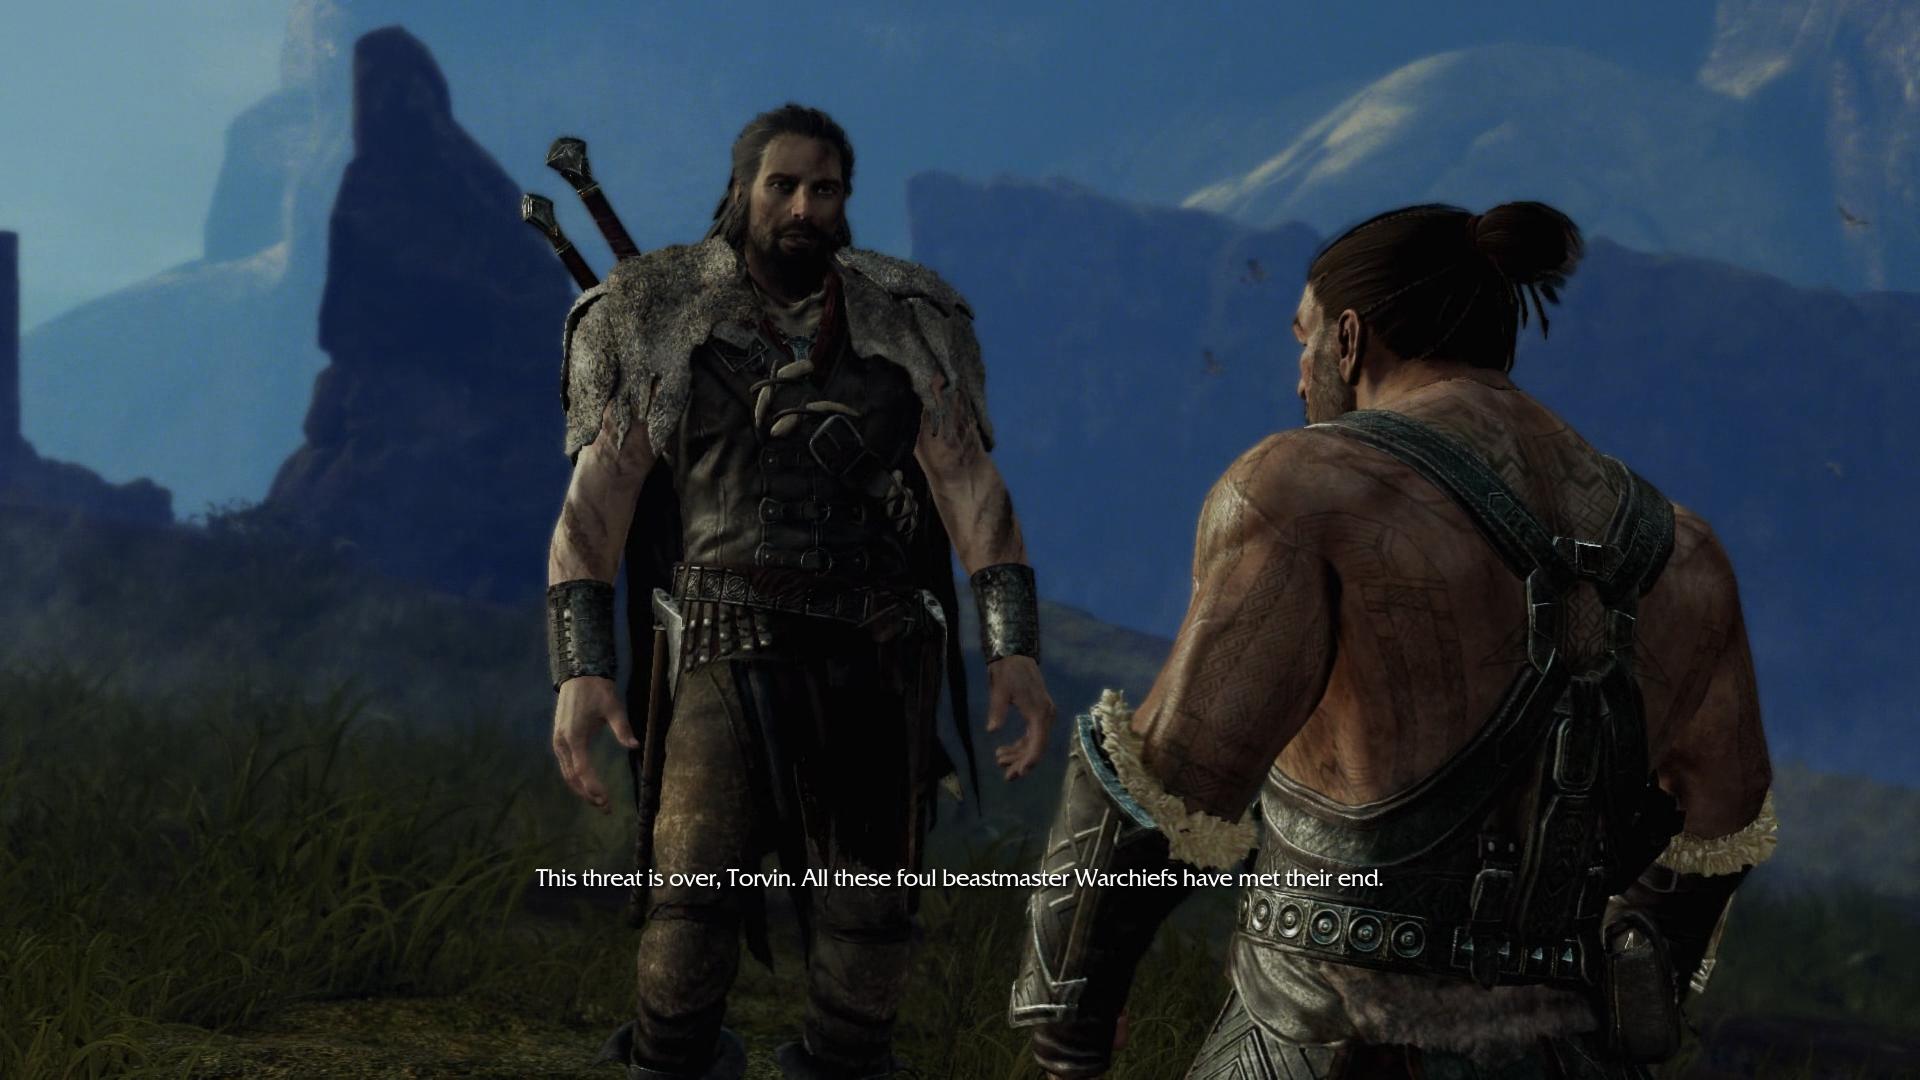 Shadow of Mordor Lord of the Hunt DLC Details Revealed